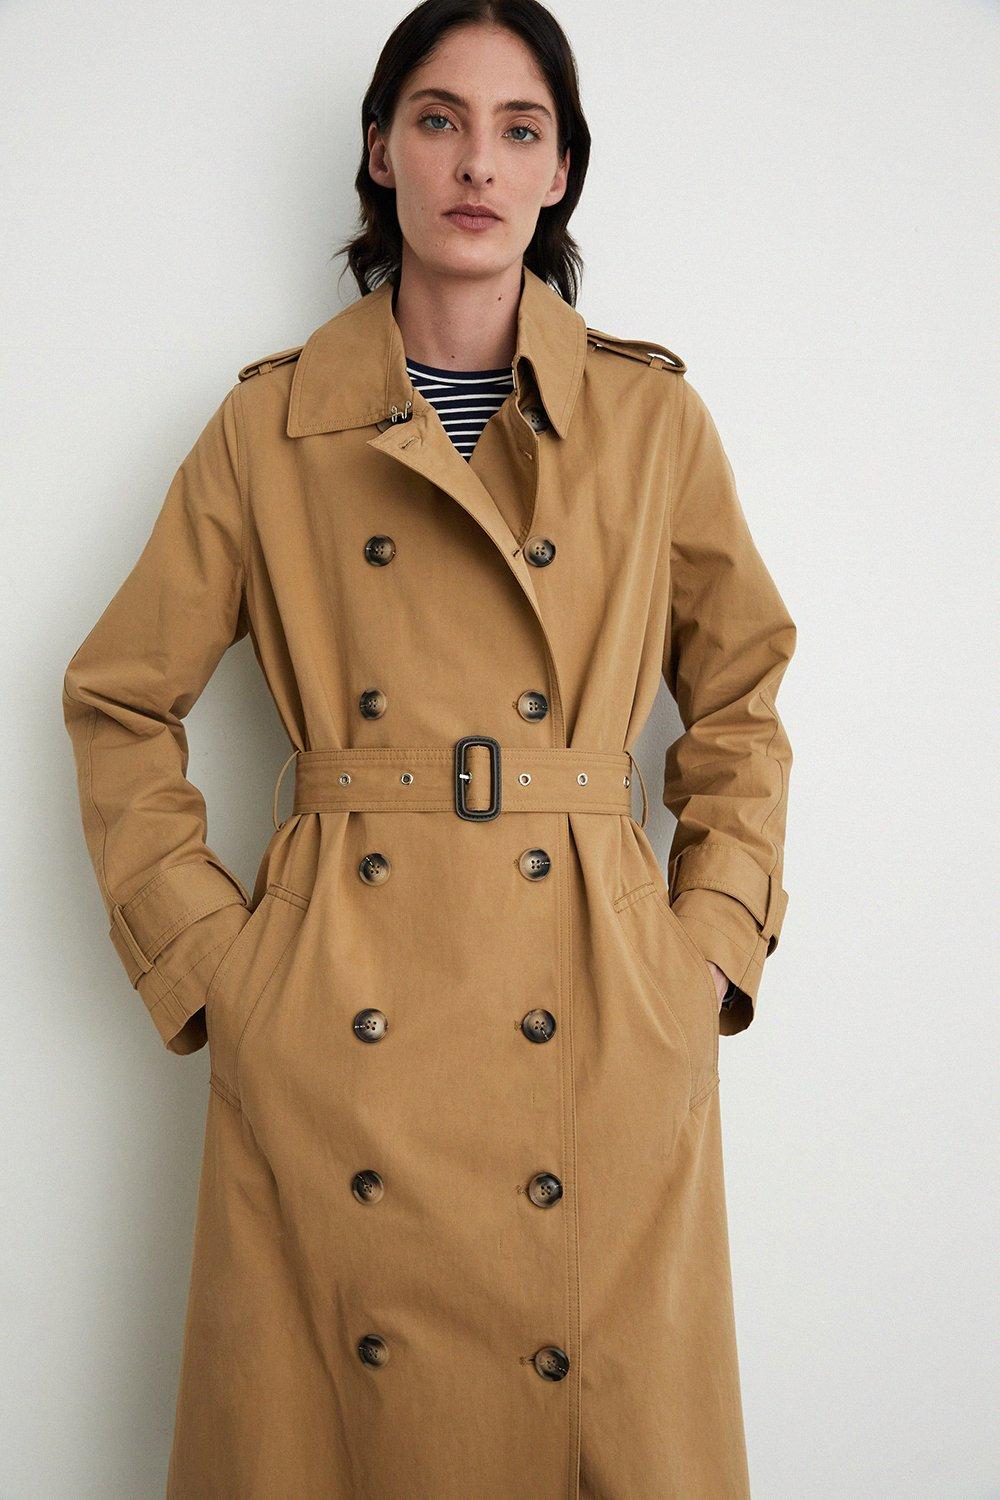 Womens Modern Classic Trench Coat - camel